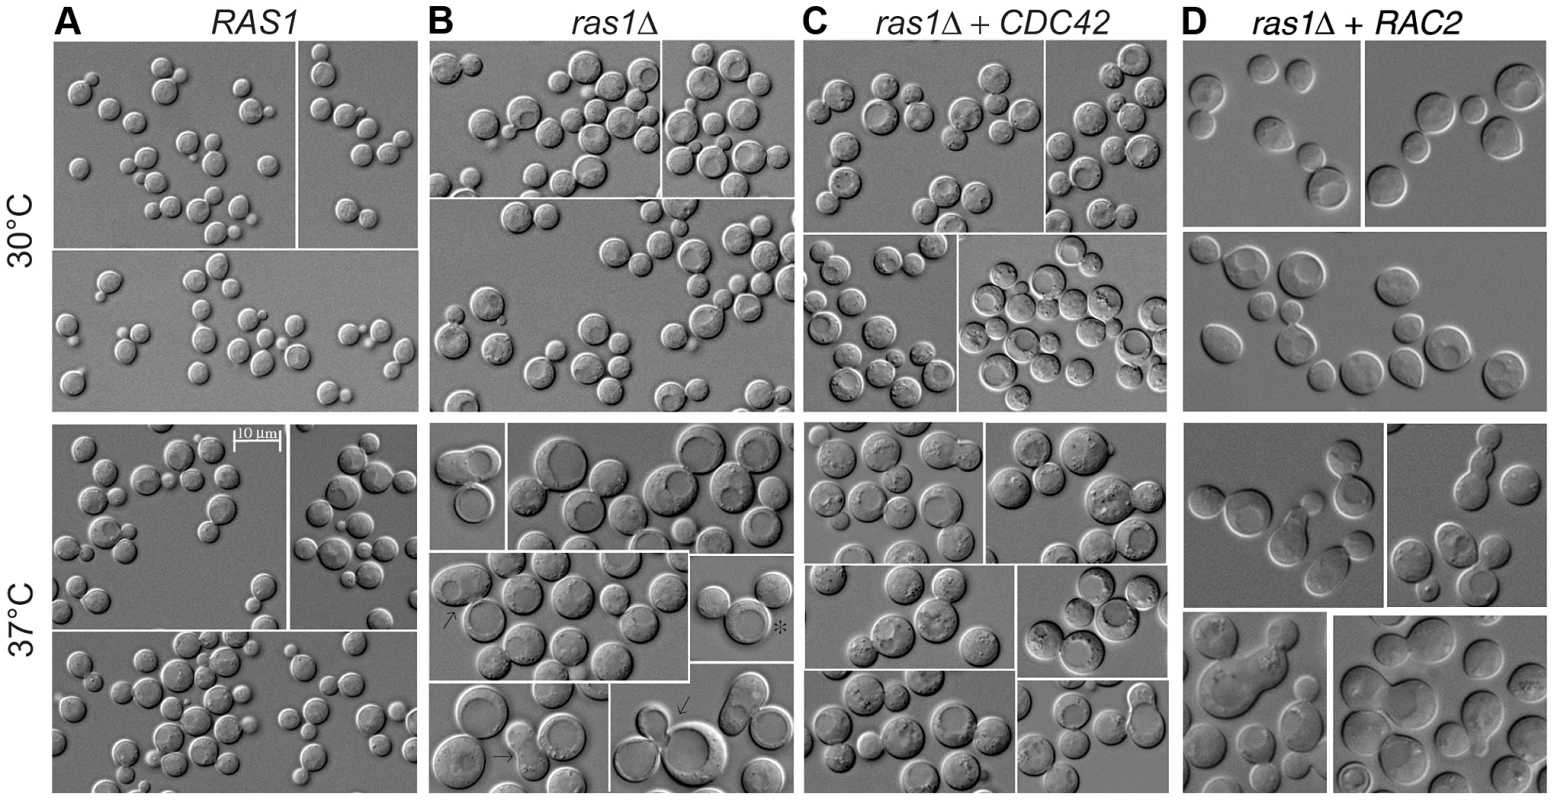 Yeast phase morphology of <i>C. neoformans</i> cells at 30 and 37°C after 4 hours.